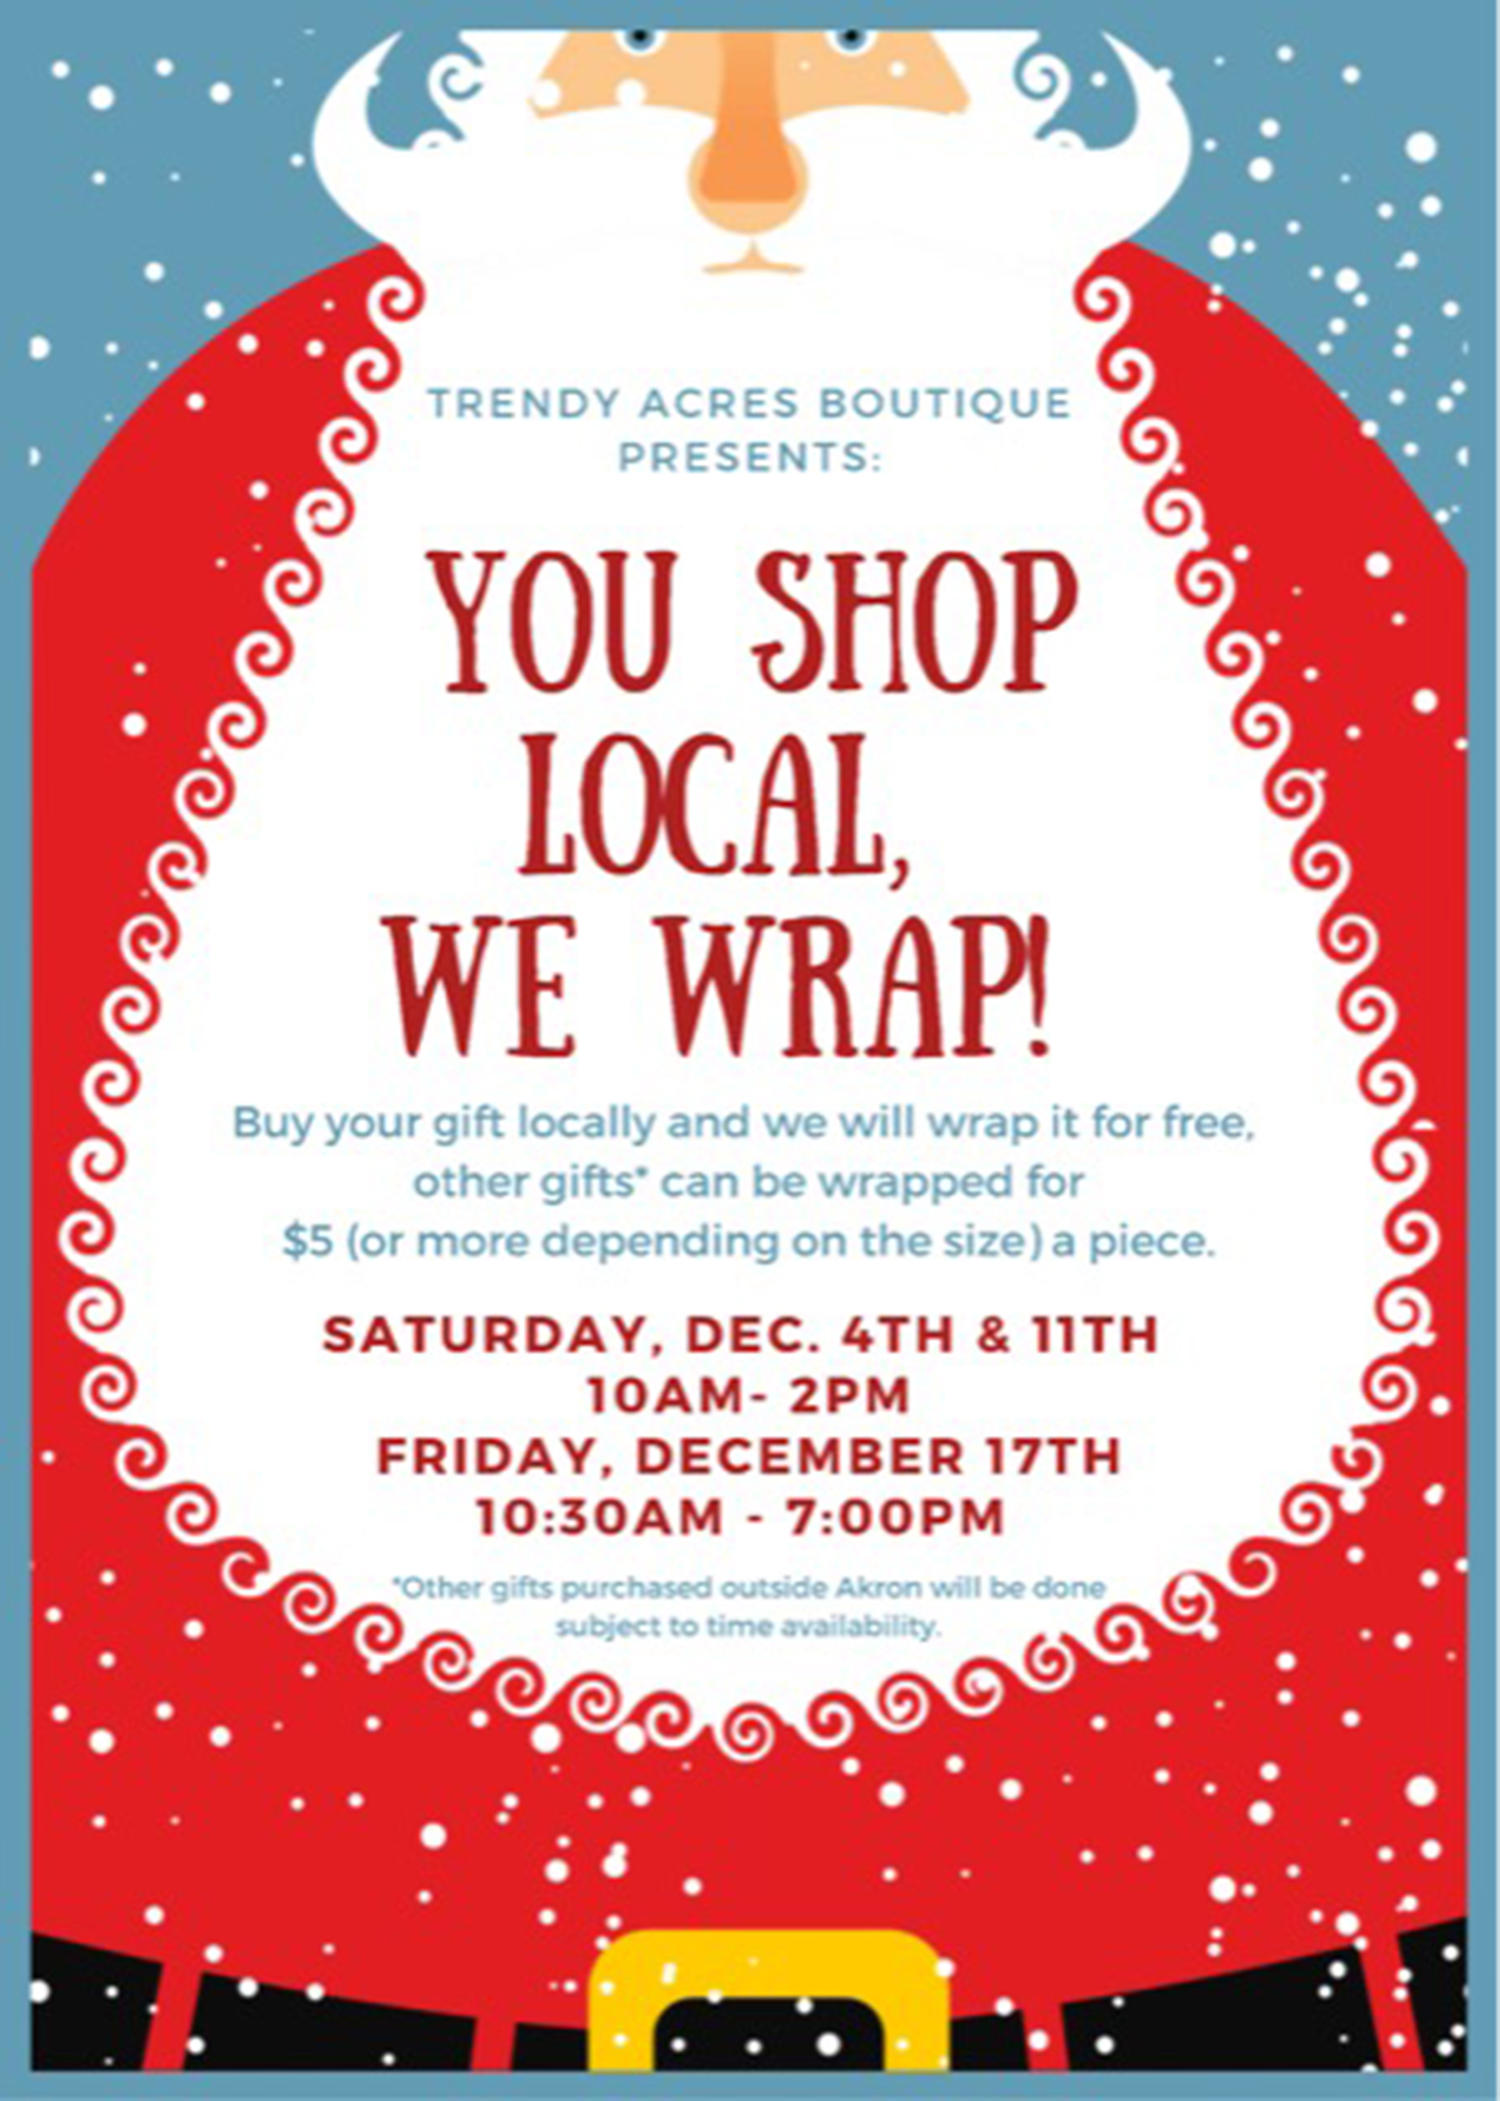 2021 Trendy Acres Gift Wrapping Promo